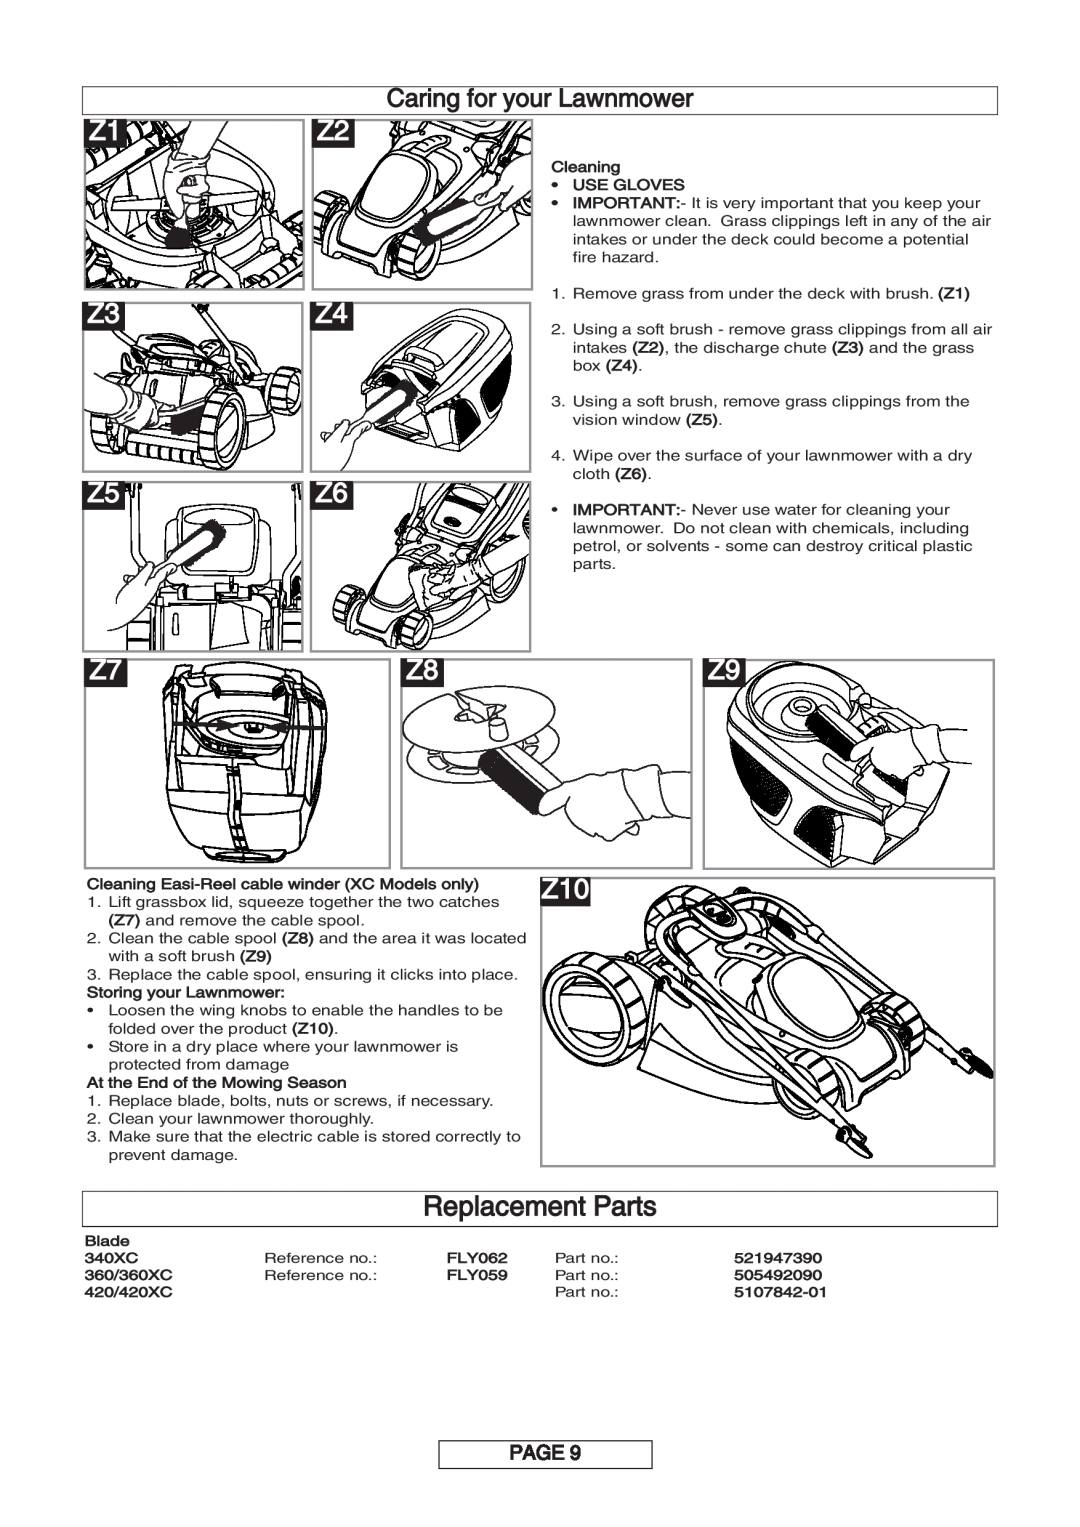 Flymo 360XC, 420XC, 340XC manual Replacement Parts 